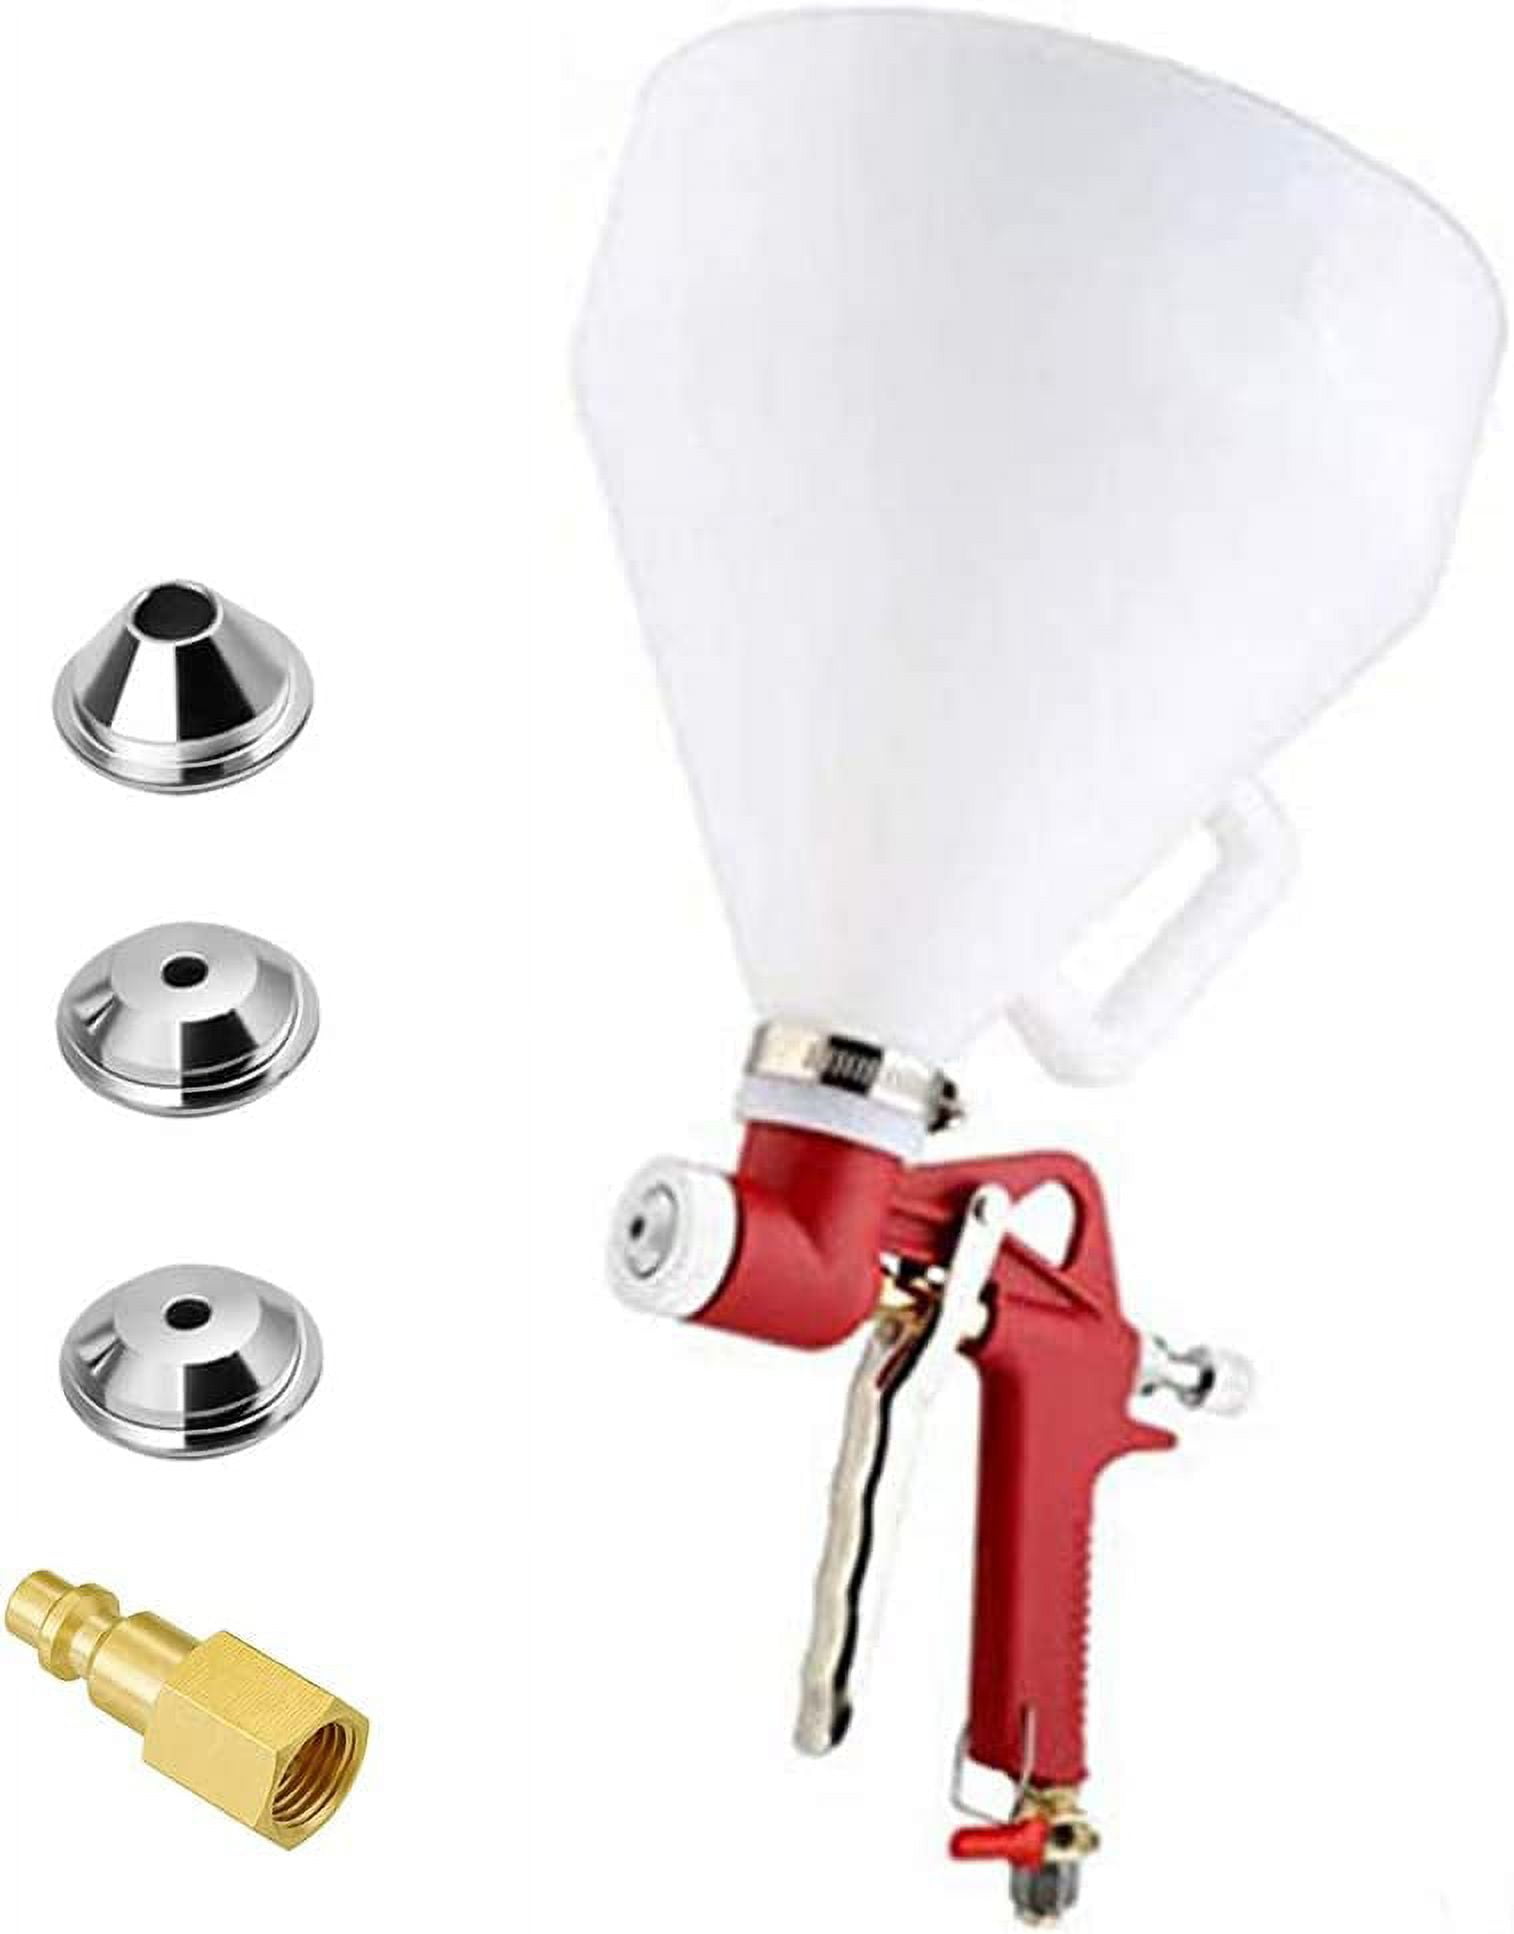  Astro 4550 Air Operated Paint Shaker : Tools & Home Improvement